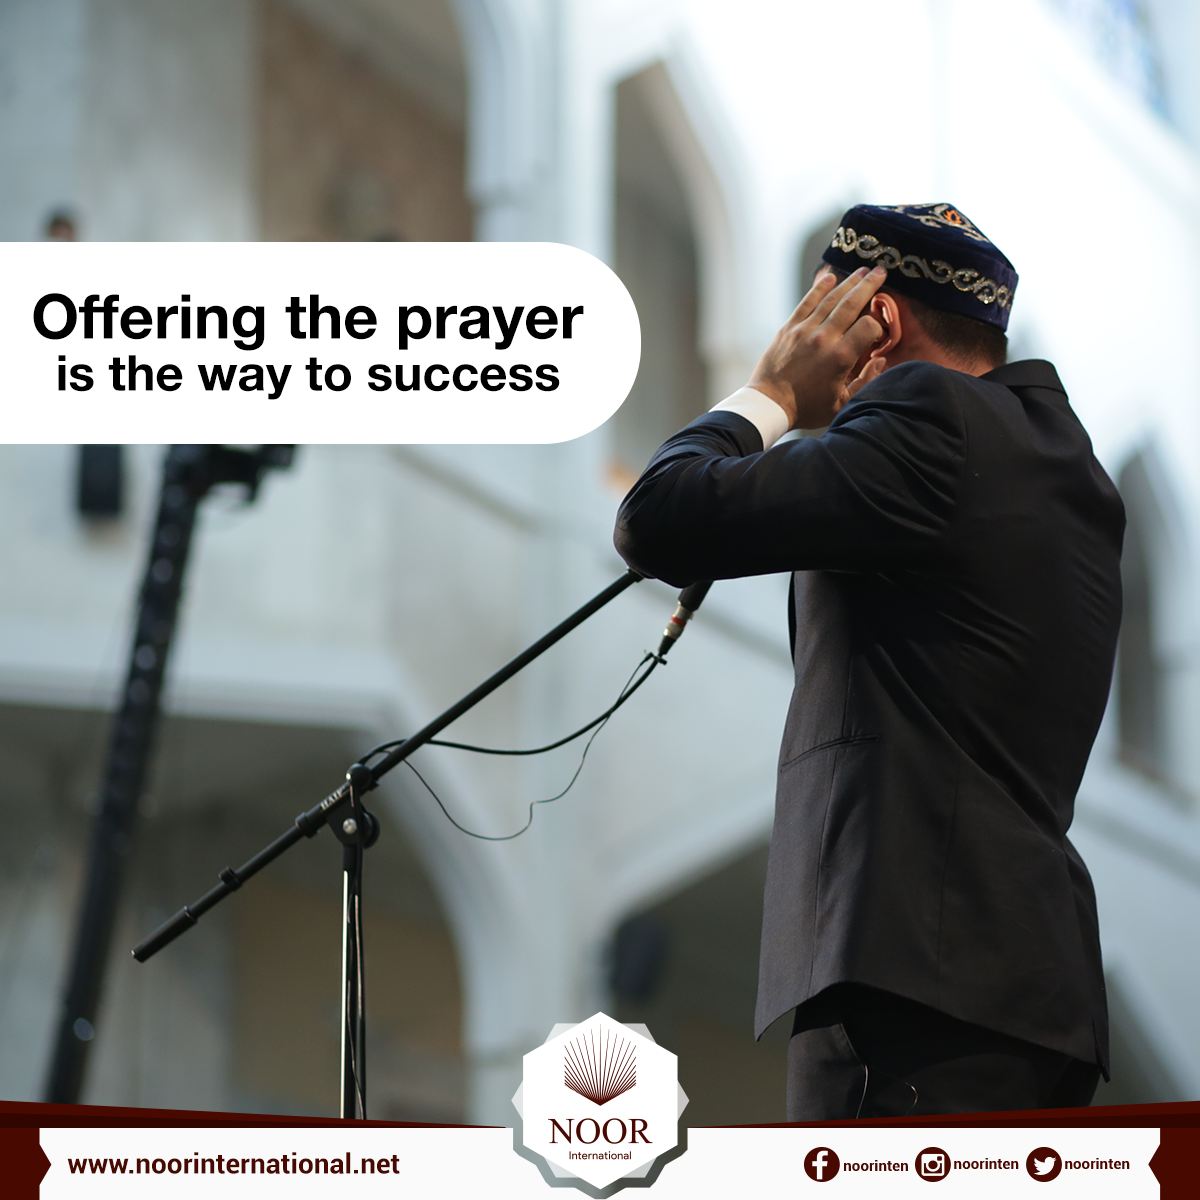 Offering the prayer is the way to success